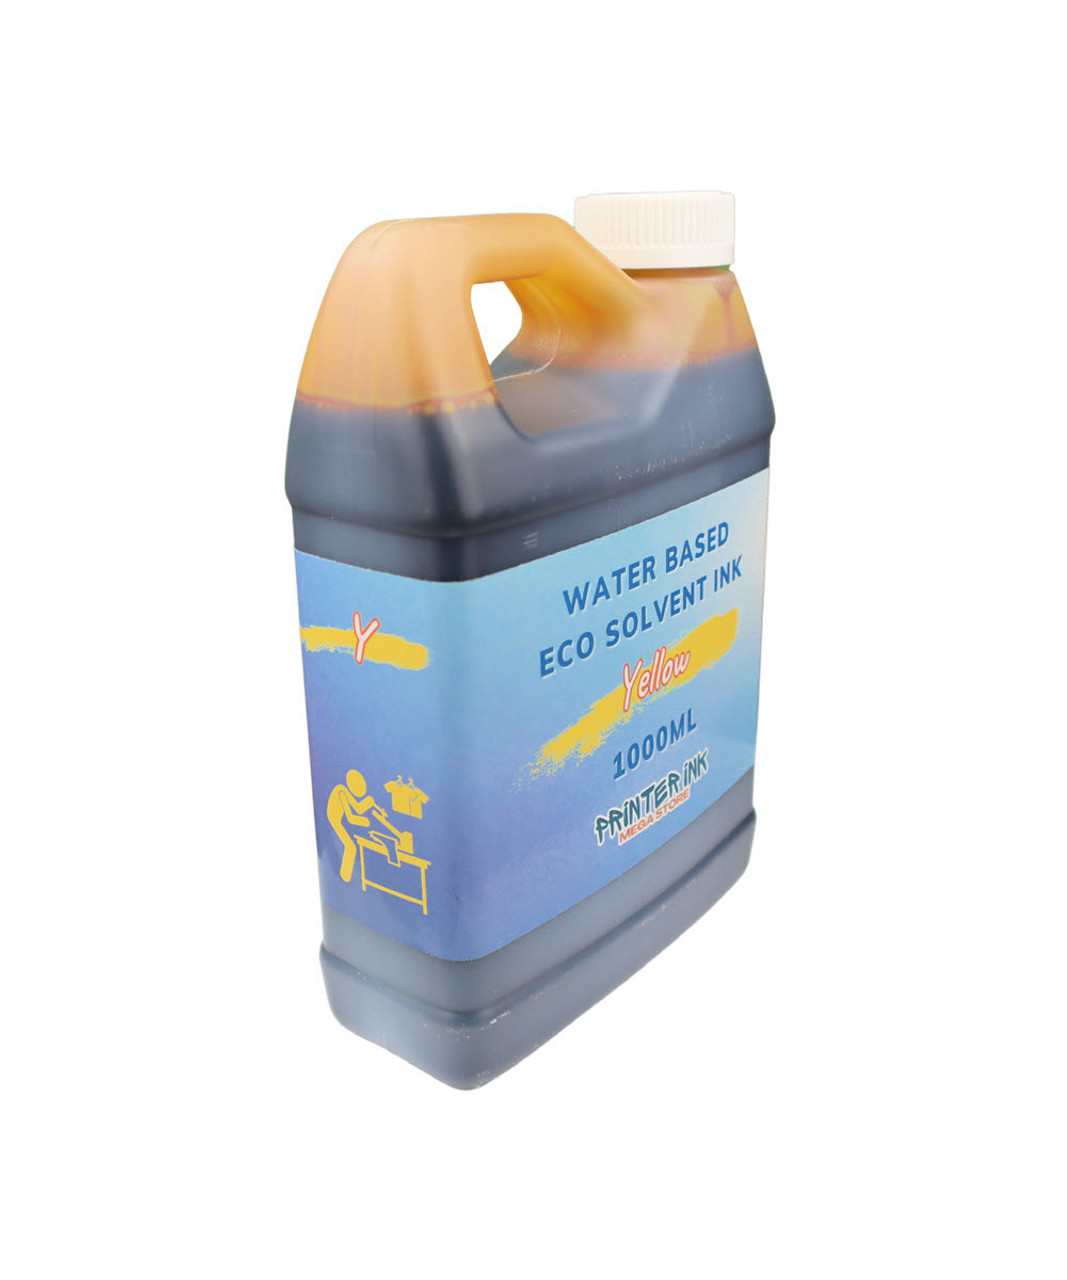 Yellow Water Based Eco Solvent Ink 1000ml Bottle for Epson SureColor T3270 T5270 T7270 Printers